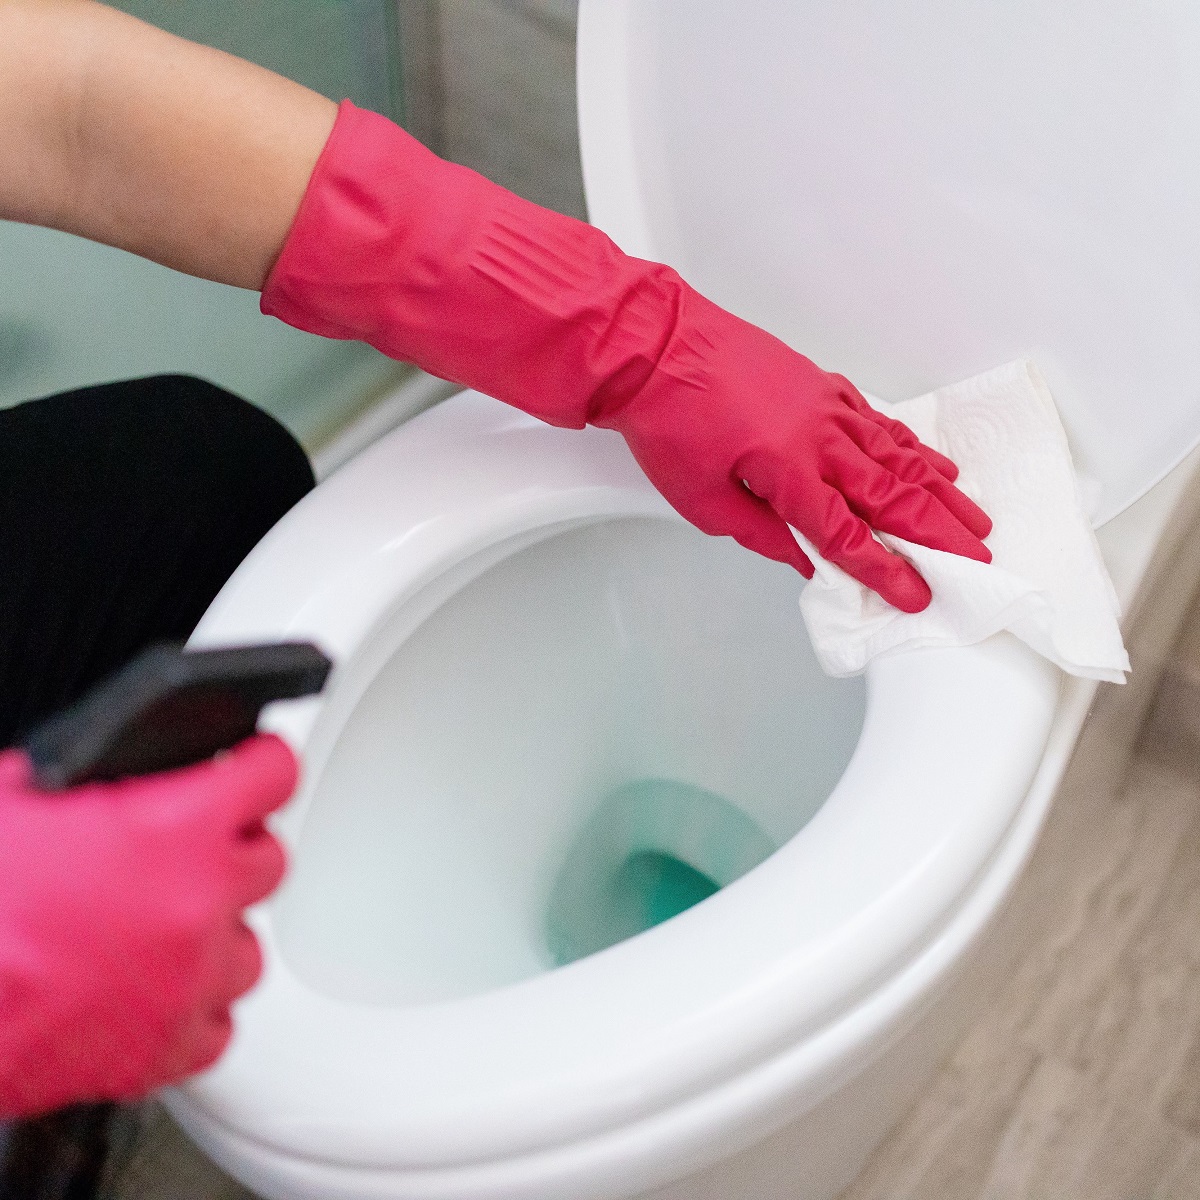 How To Clean A Toilet Seat